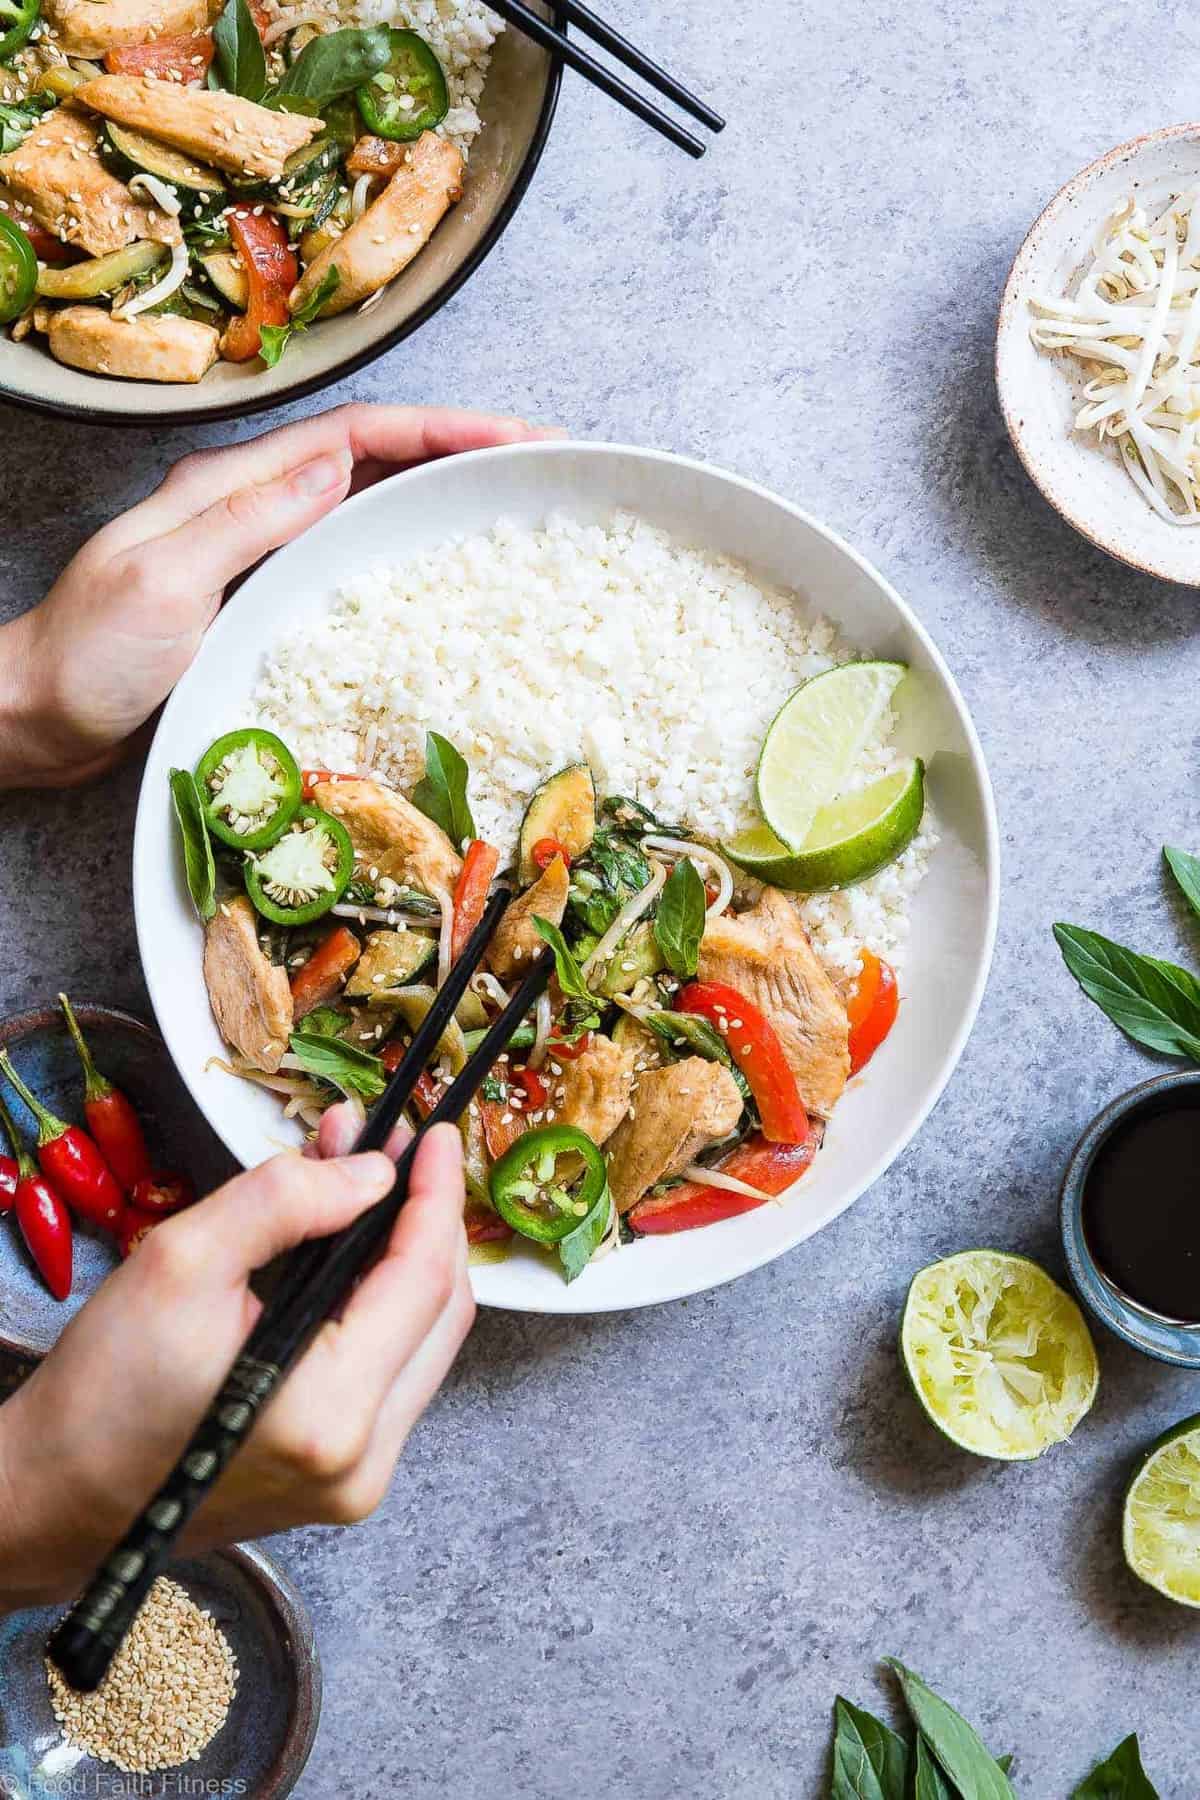 Spicy Thai Basil Chicken Stir Fry - This Thai chicken with basil stir fry is a 20 minute, healthy, gluten free dinner that is paleo friendly, lower carb and only 300 calories! It will be your new go to weeknight meal! | #Foodfaithfitness | #Glutenfree #Paleo #Lowcarb #Healthy #DairyFree